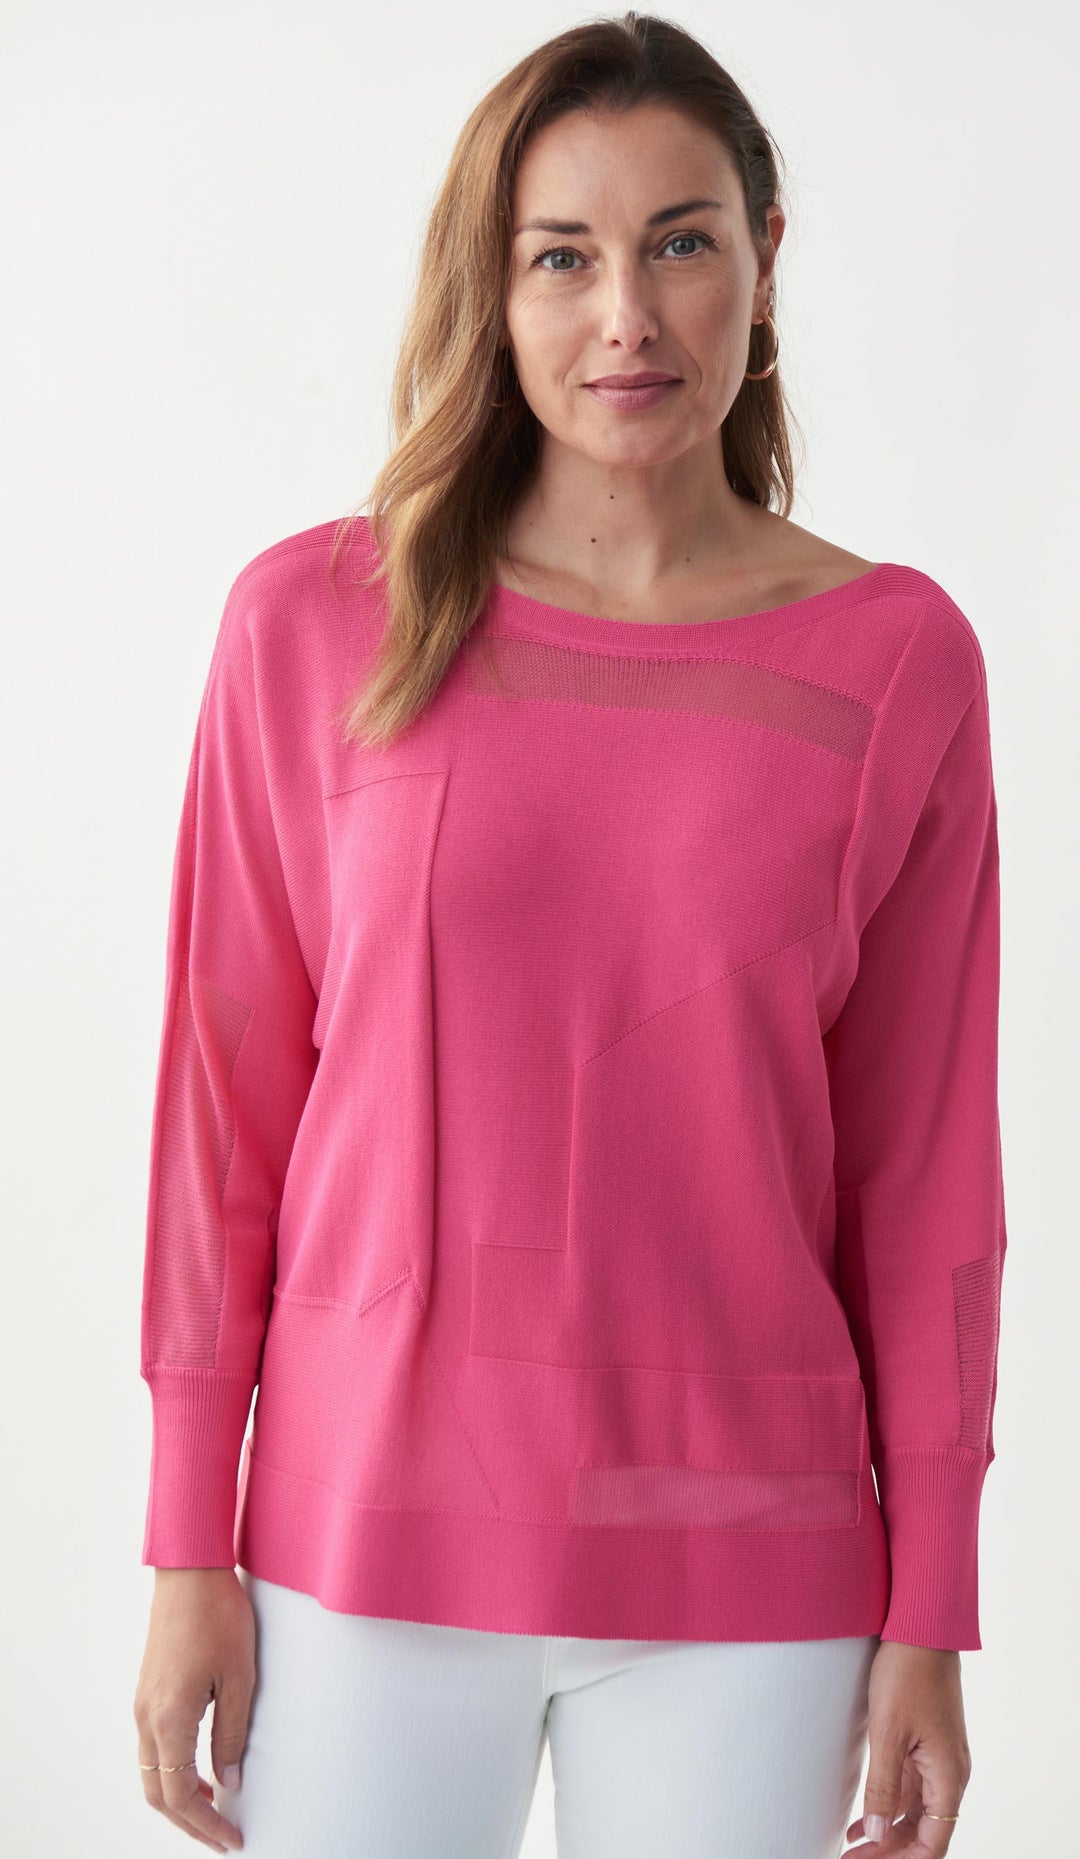 Joseph Ribkoff Raspberry Sorbet Cut-Out Knit Top Style 221909 - Knitwear, New, Raspberry Sorbet, SS22, Top ginasmartboutique